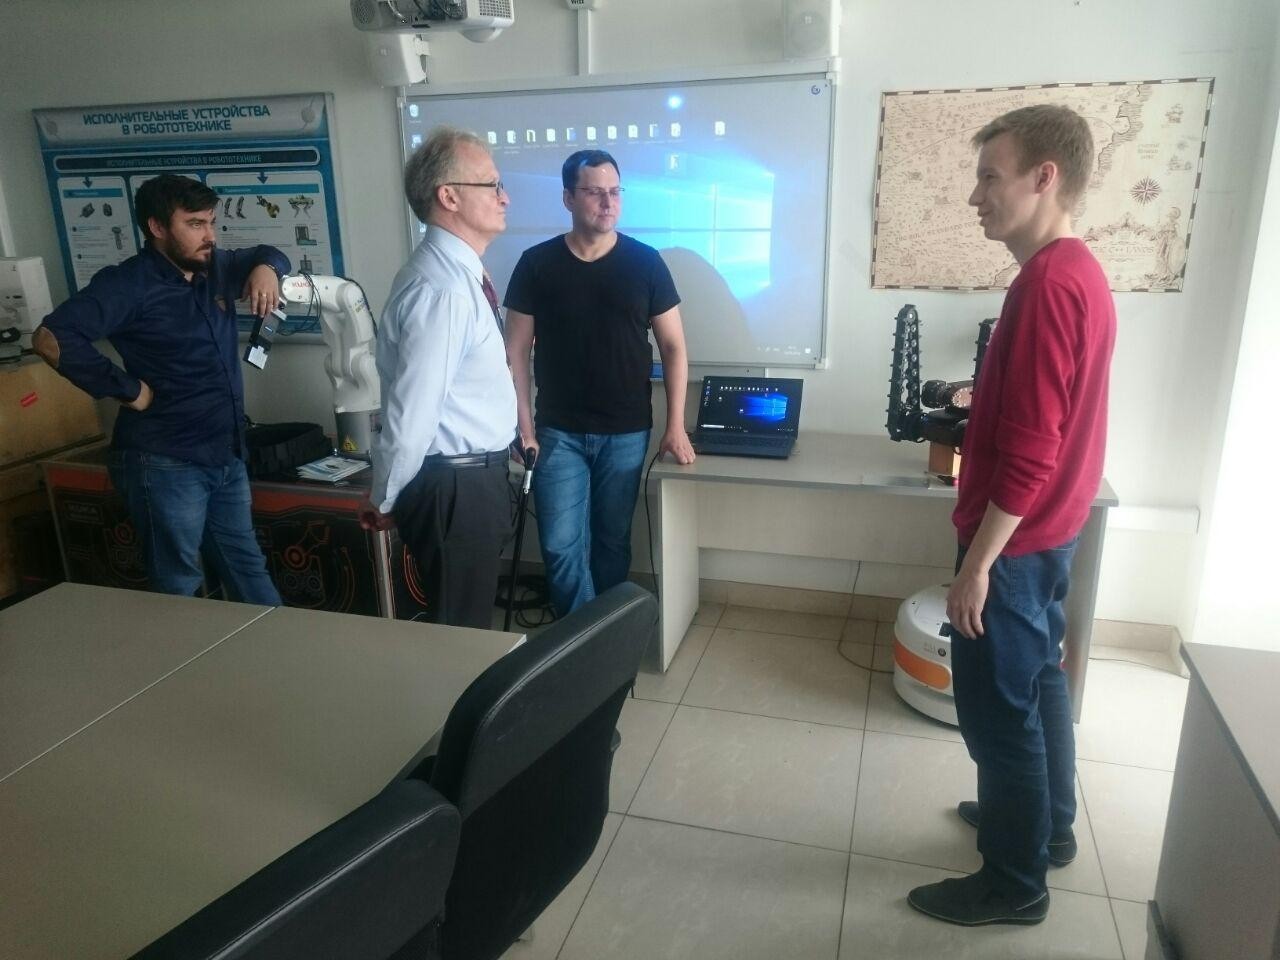 Professor from Germany visited the Laboratory of Intelligent Robotic Systems.